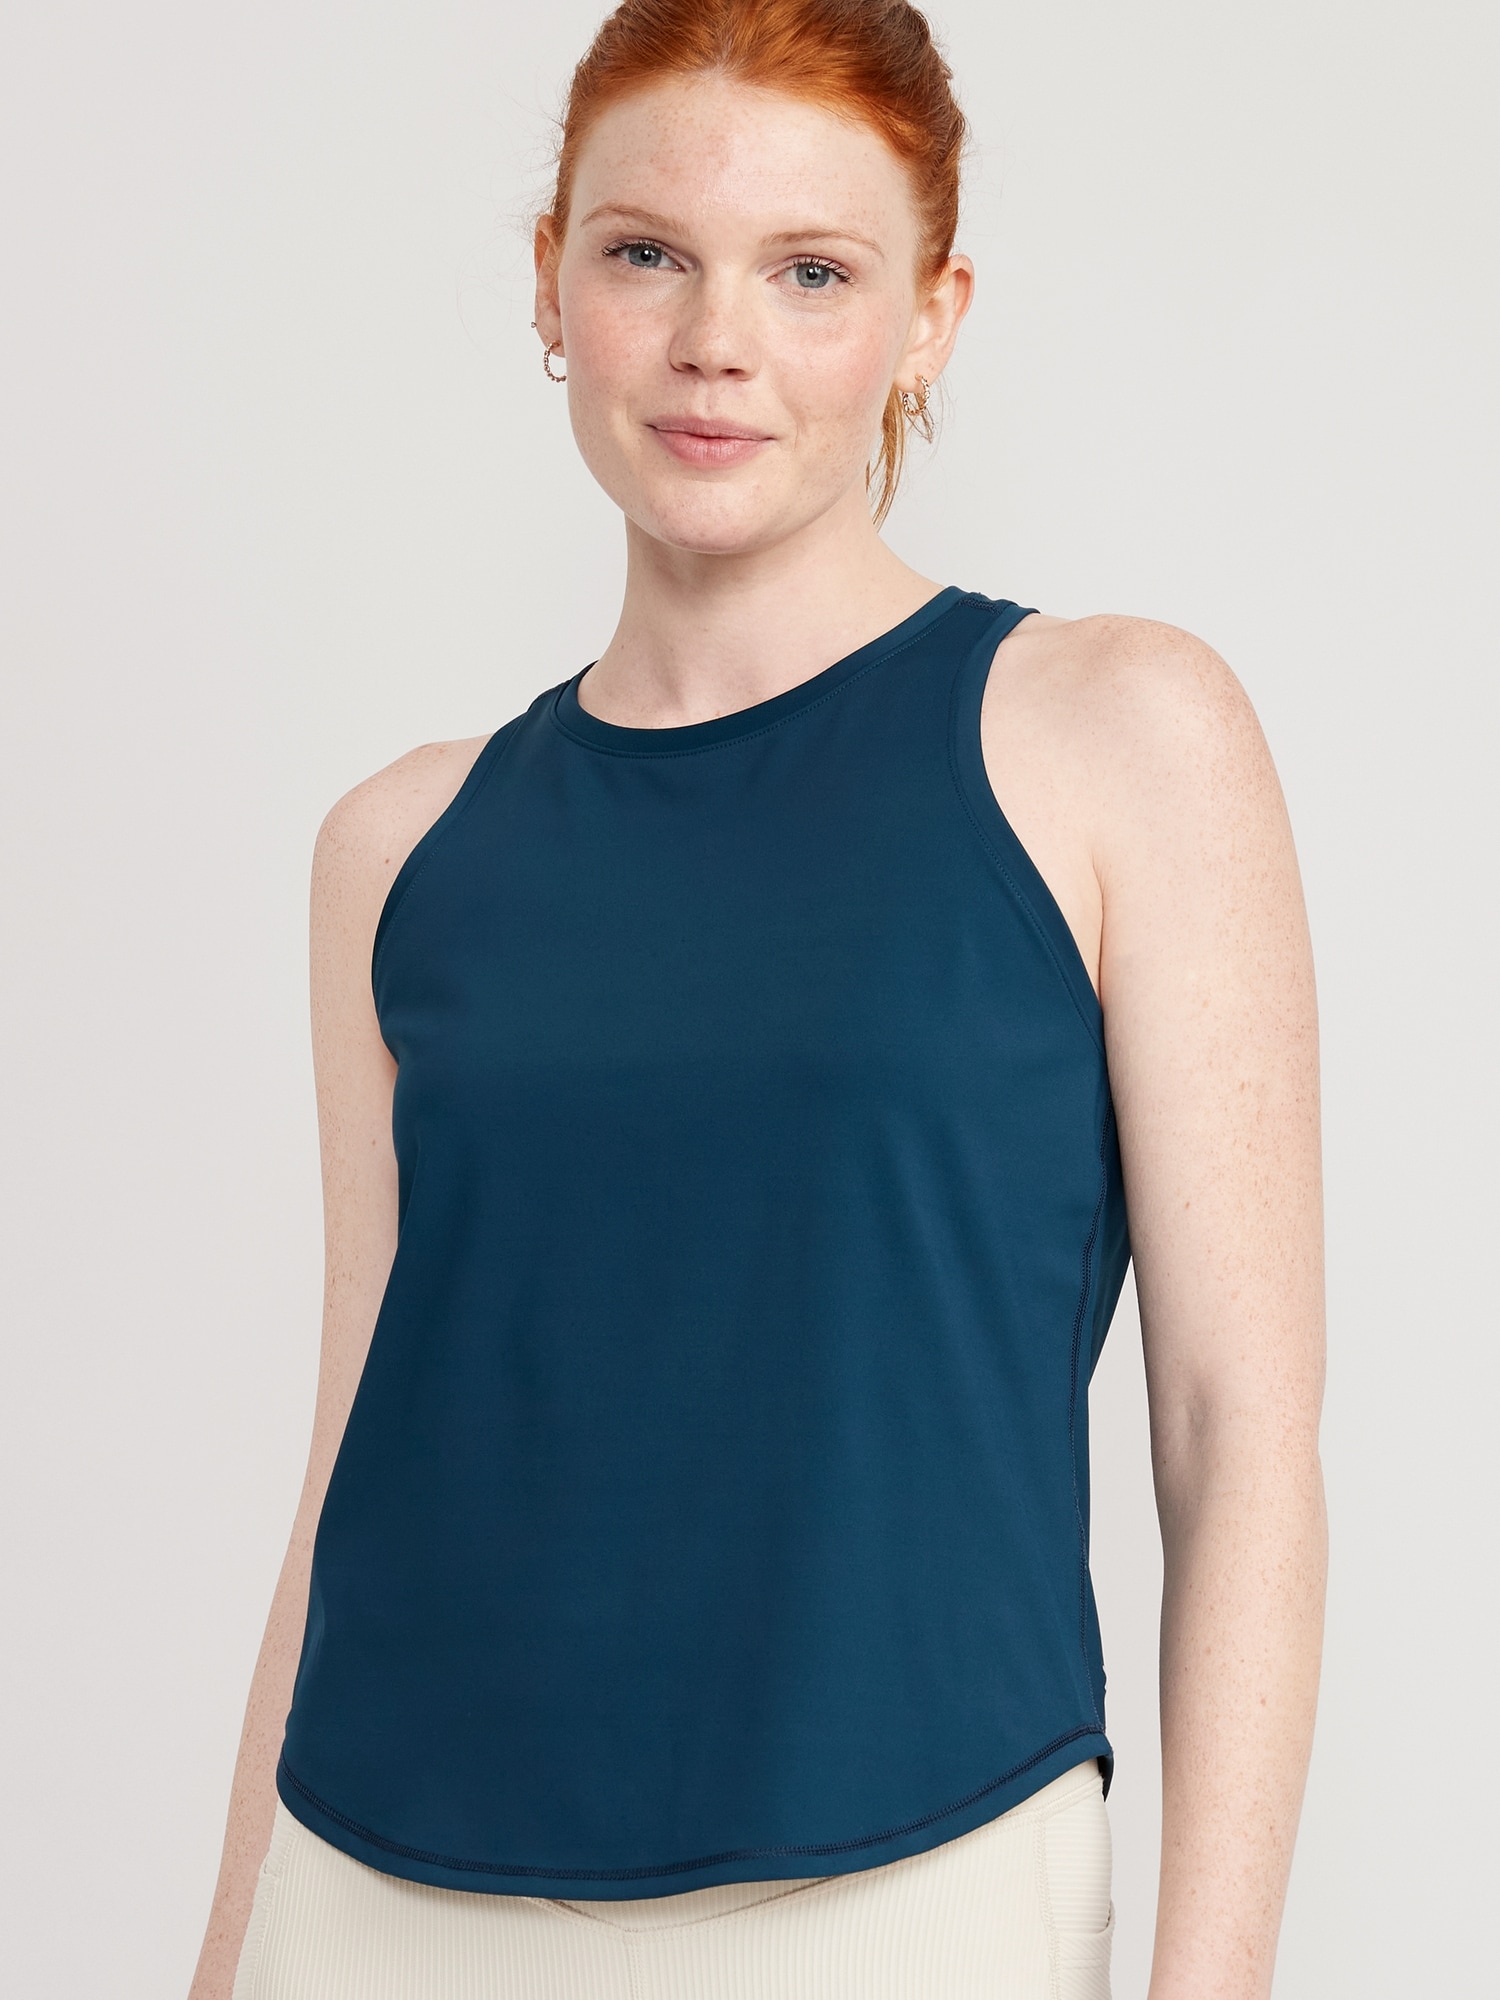 Old Navy PowerSoft Racerback Tank Top for Women blue. 1